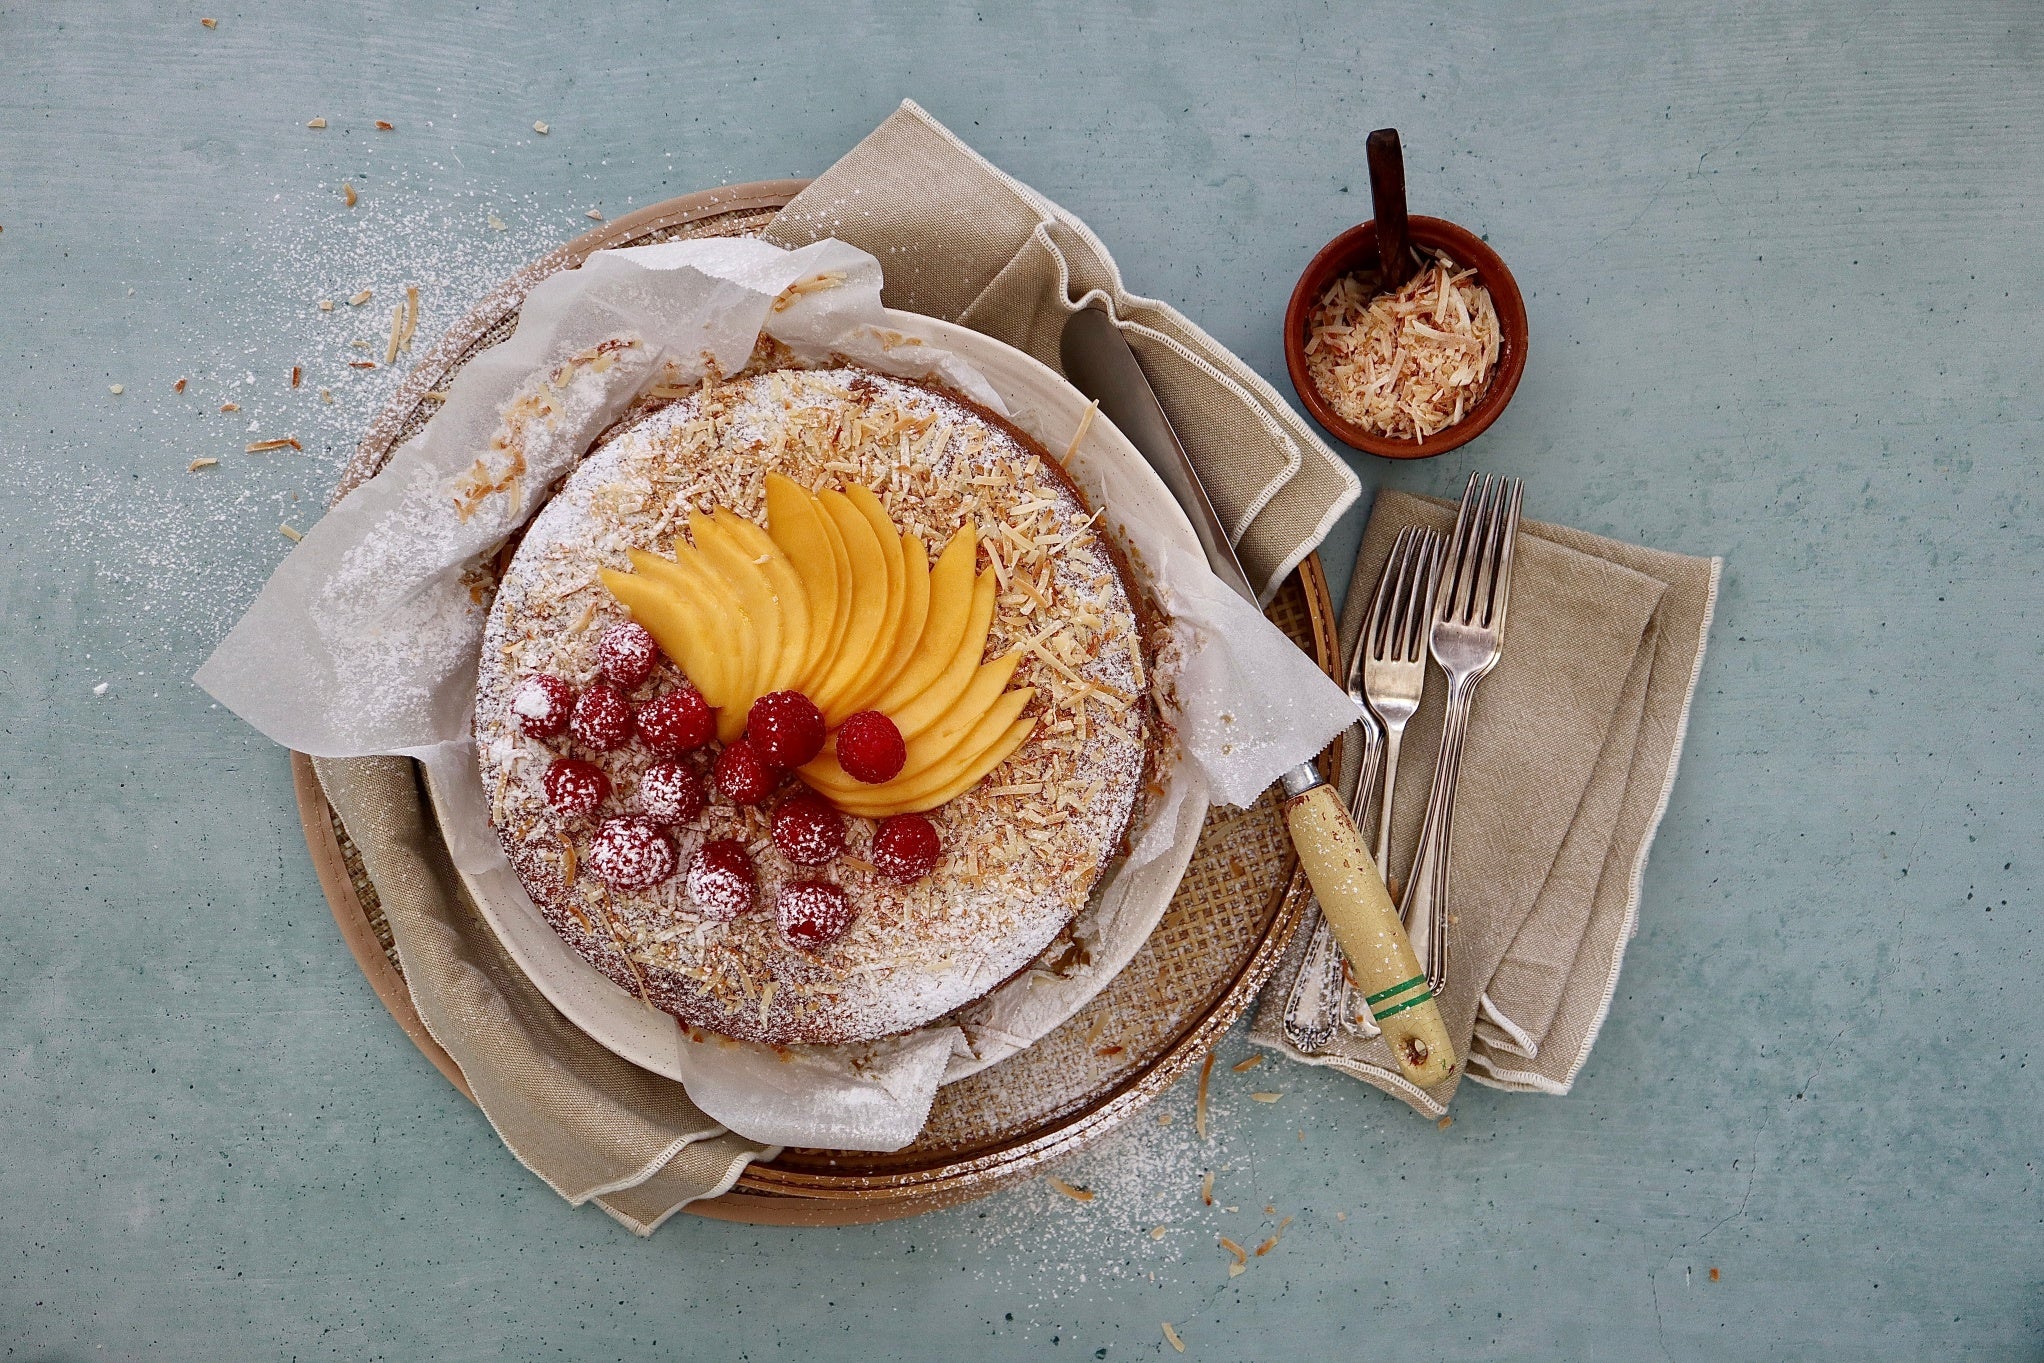 A sponge cake with mango, desiccated coconut and raspberries